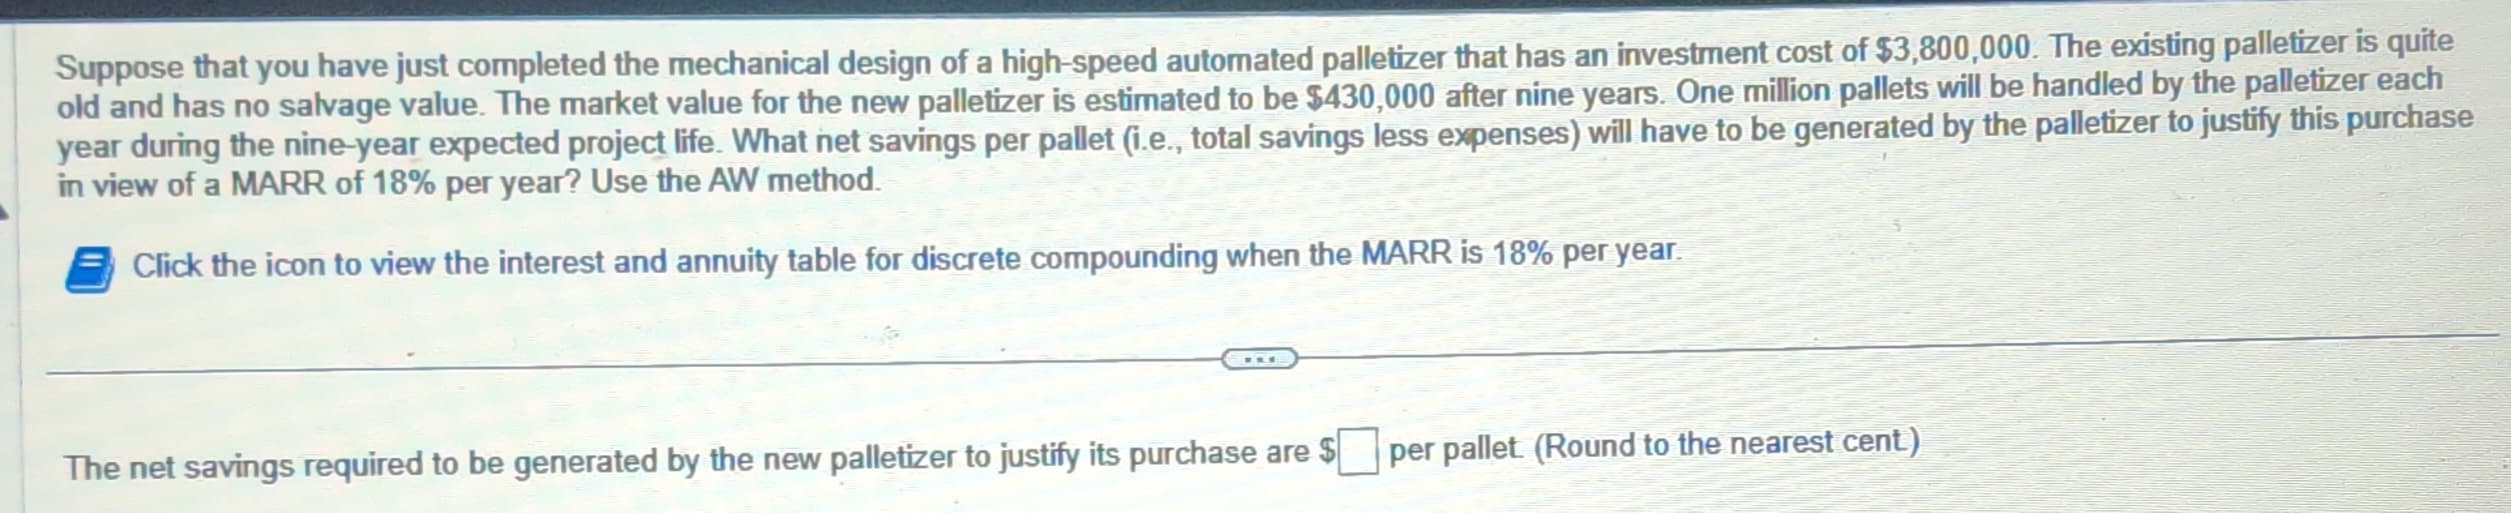 Suppose that you have just completed the mechanical design of a high-speed automated palletizer that has an investment cost of $3,800,000. The existing palletizer is quite
old and has no salvage value. The market value for the new palletizer is estimated to be $430,000 after nine years. One million pallets will be handled by the palletizer each
year during the nine-year expected project life. What net savings per pallet (i.e., total savings less expenses) will have to be generated by the palletizer to justify this purchase
in view of a MARR of 18% per year? Use the AW method.
Click the icon to view the interest and annuity table for discrete compounding when the MARR is 18% per year.
The net savings required to be generated by the new palletizer to justify its purchase are $
per pallet (Round to the nearest cent)